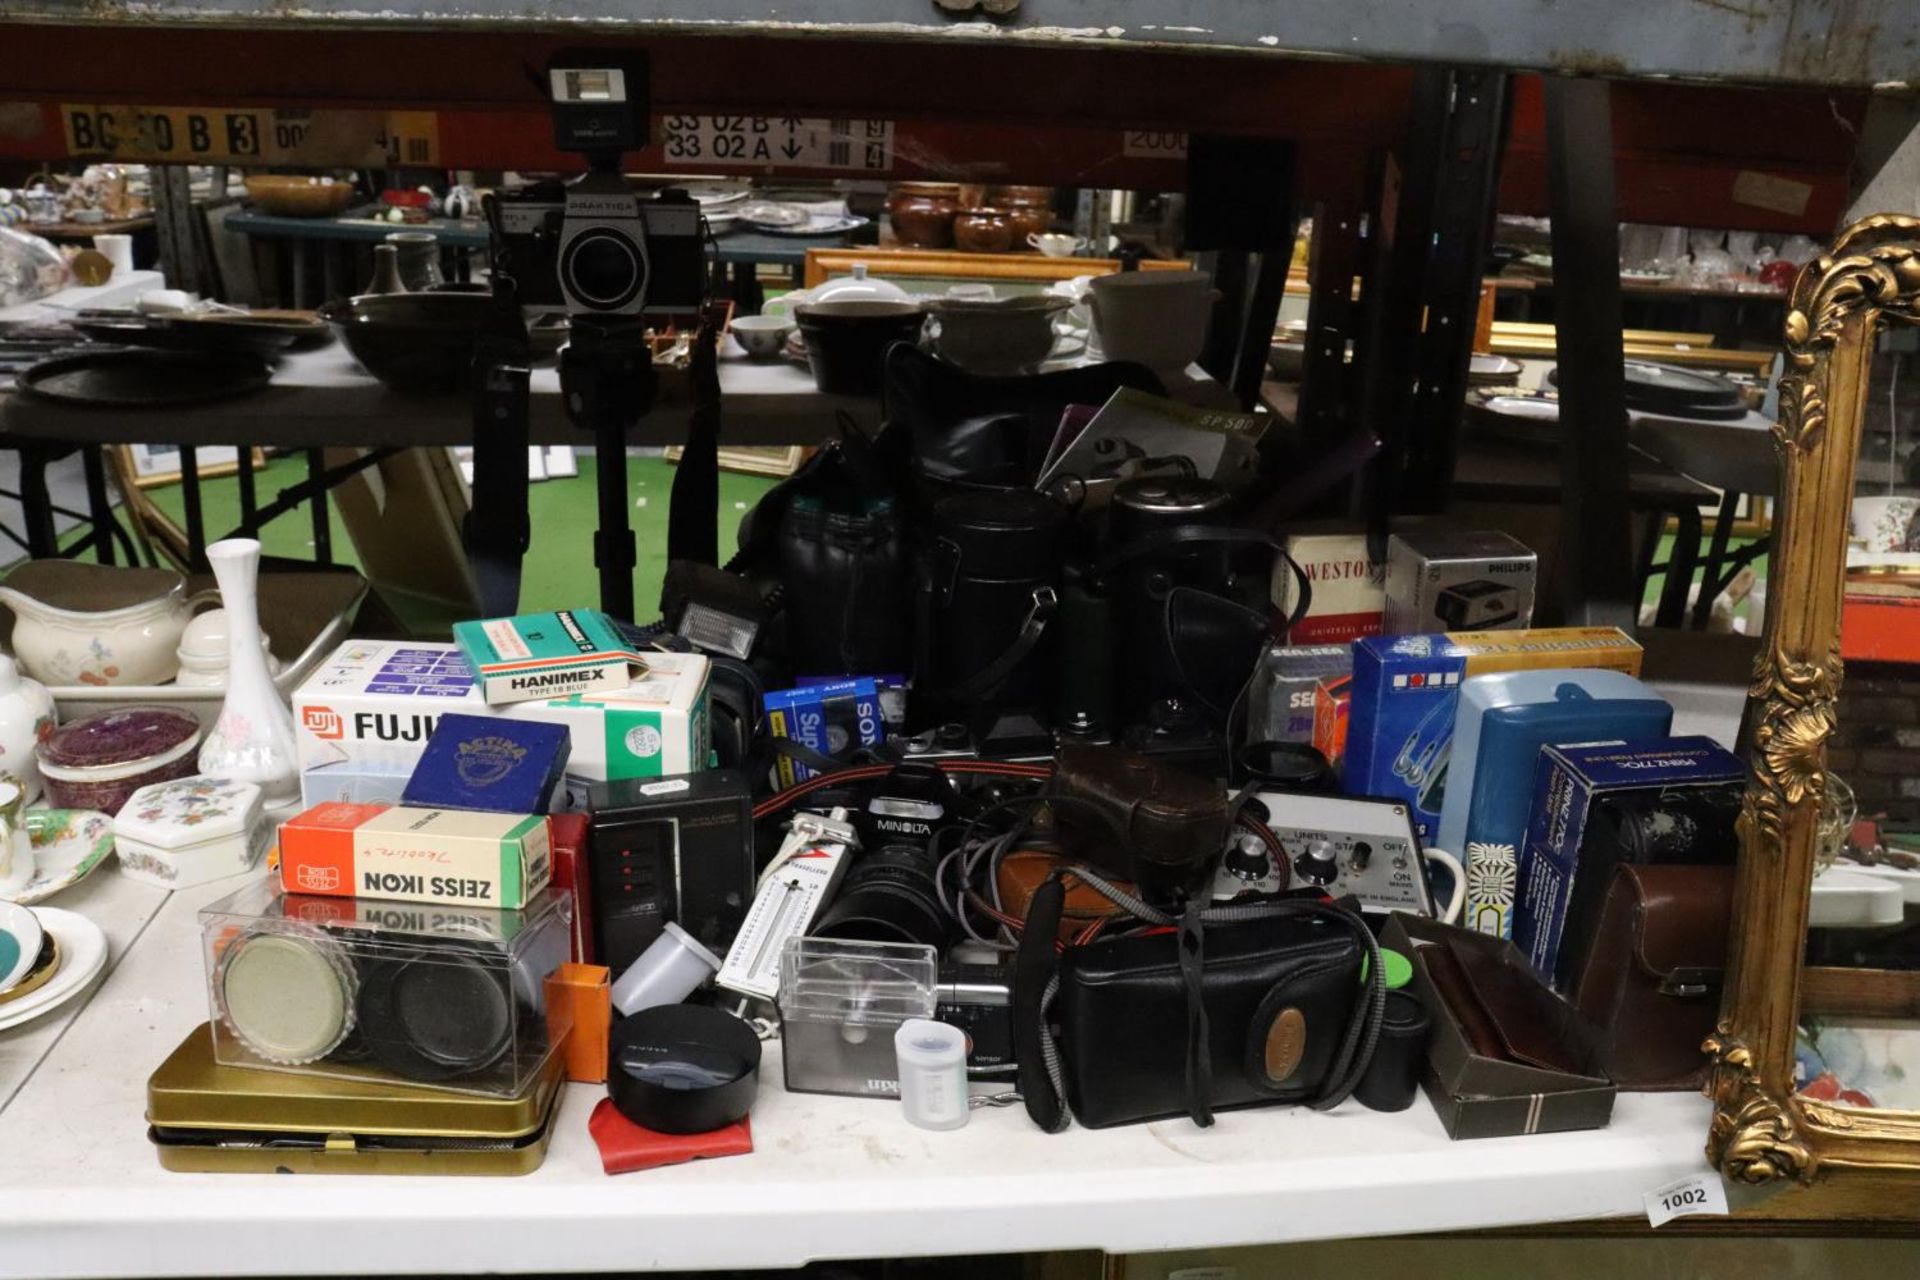 A LARGE QUANTITY OF VINTAGE CAMERAS AND ACCESSORIES TO INCLUDE PRAKTICA MTL5, MINOLTA DYNAX 5000i,